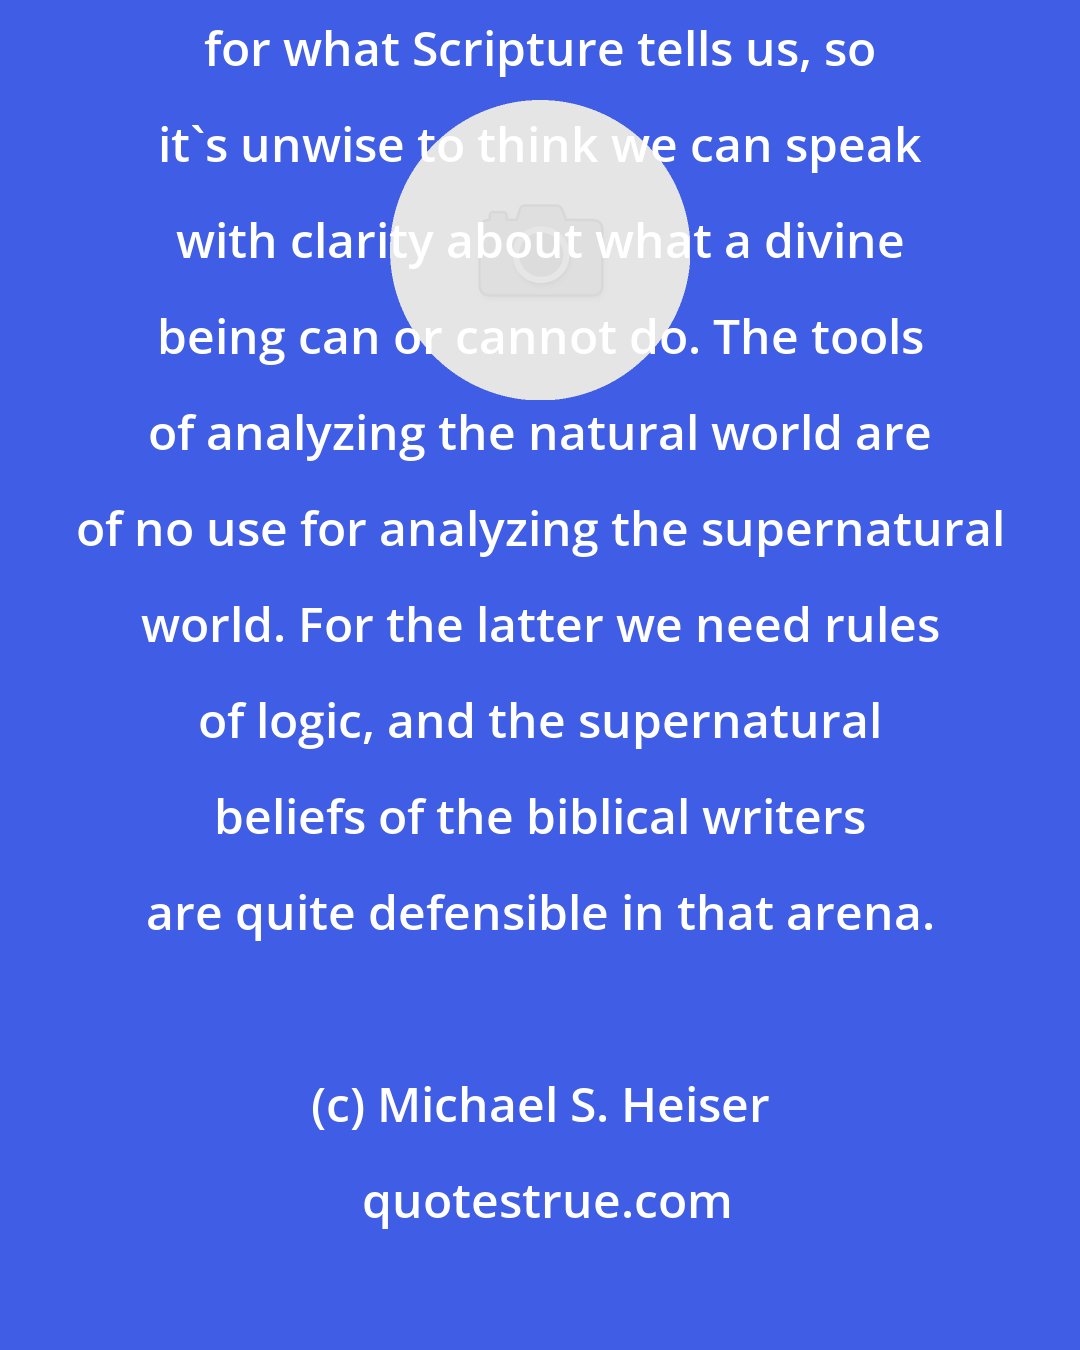 Michael S. Heiser: The truth is that we don't know much about the spiritual world except for what Scripture tells us, so it's unwise to think we can speak with clarity about what a divine being can or cannot do. The tools of analyzing the natural world are of no use for analyzing the supernatural world. For the latter we need rules of logic, and the supernatural beliefs of the biblical writers are quite defensible in that arena.